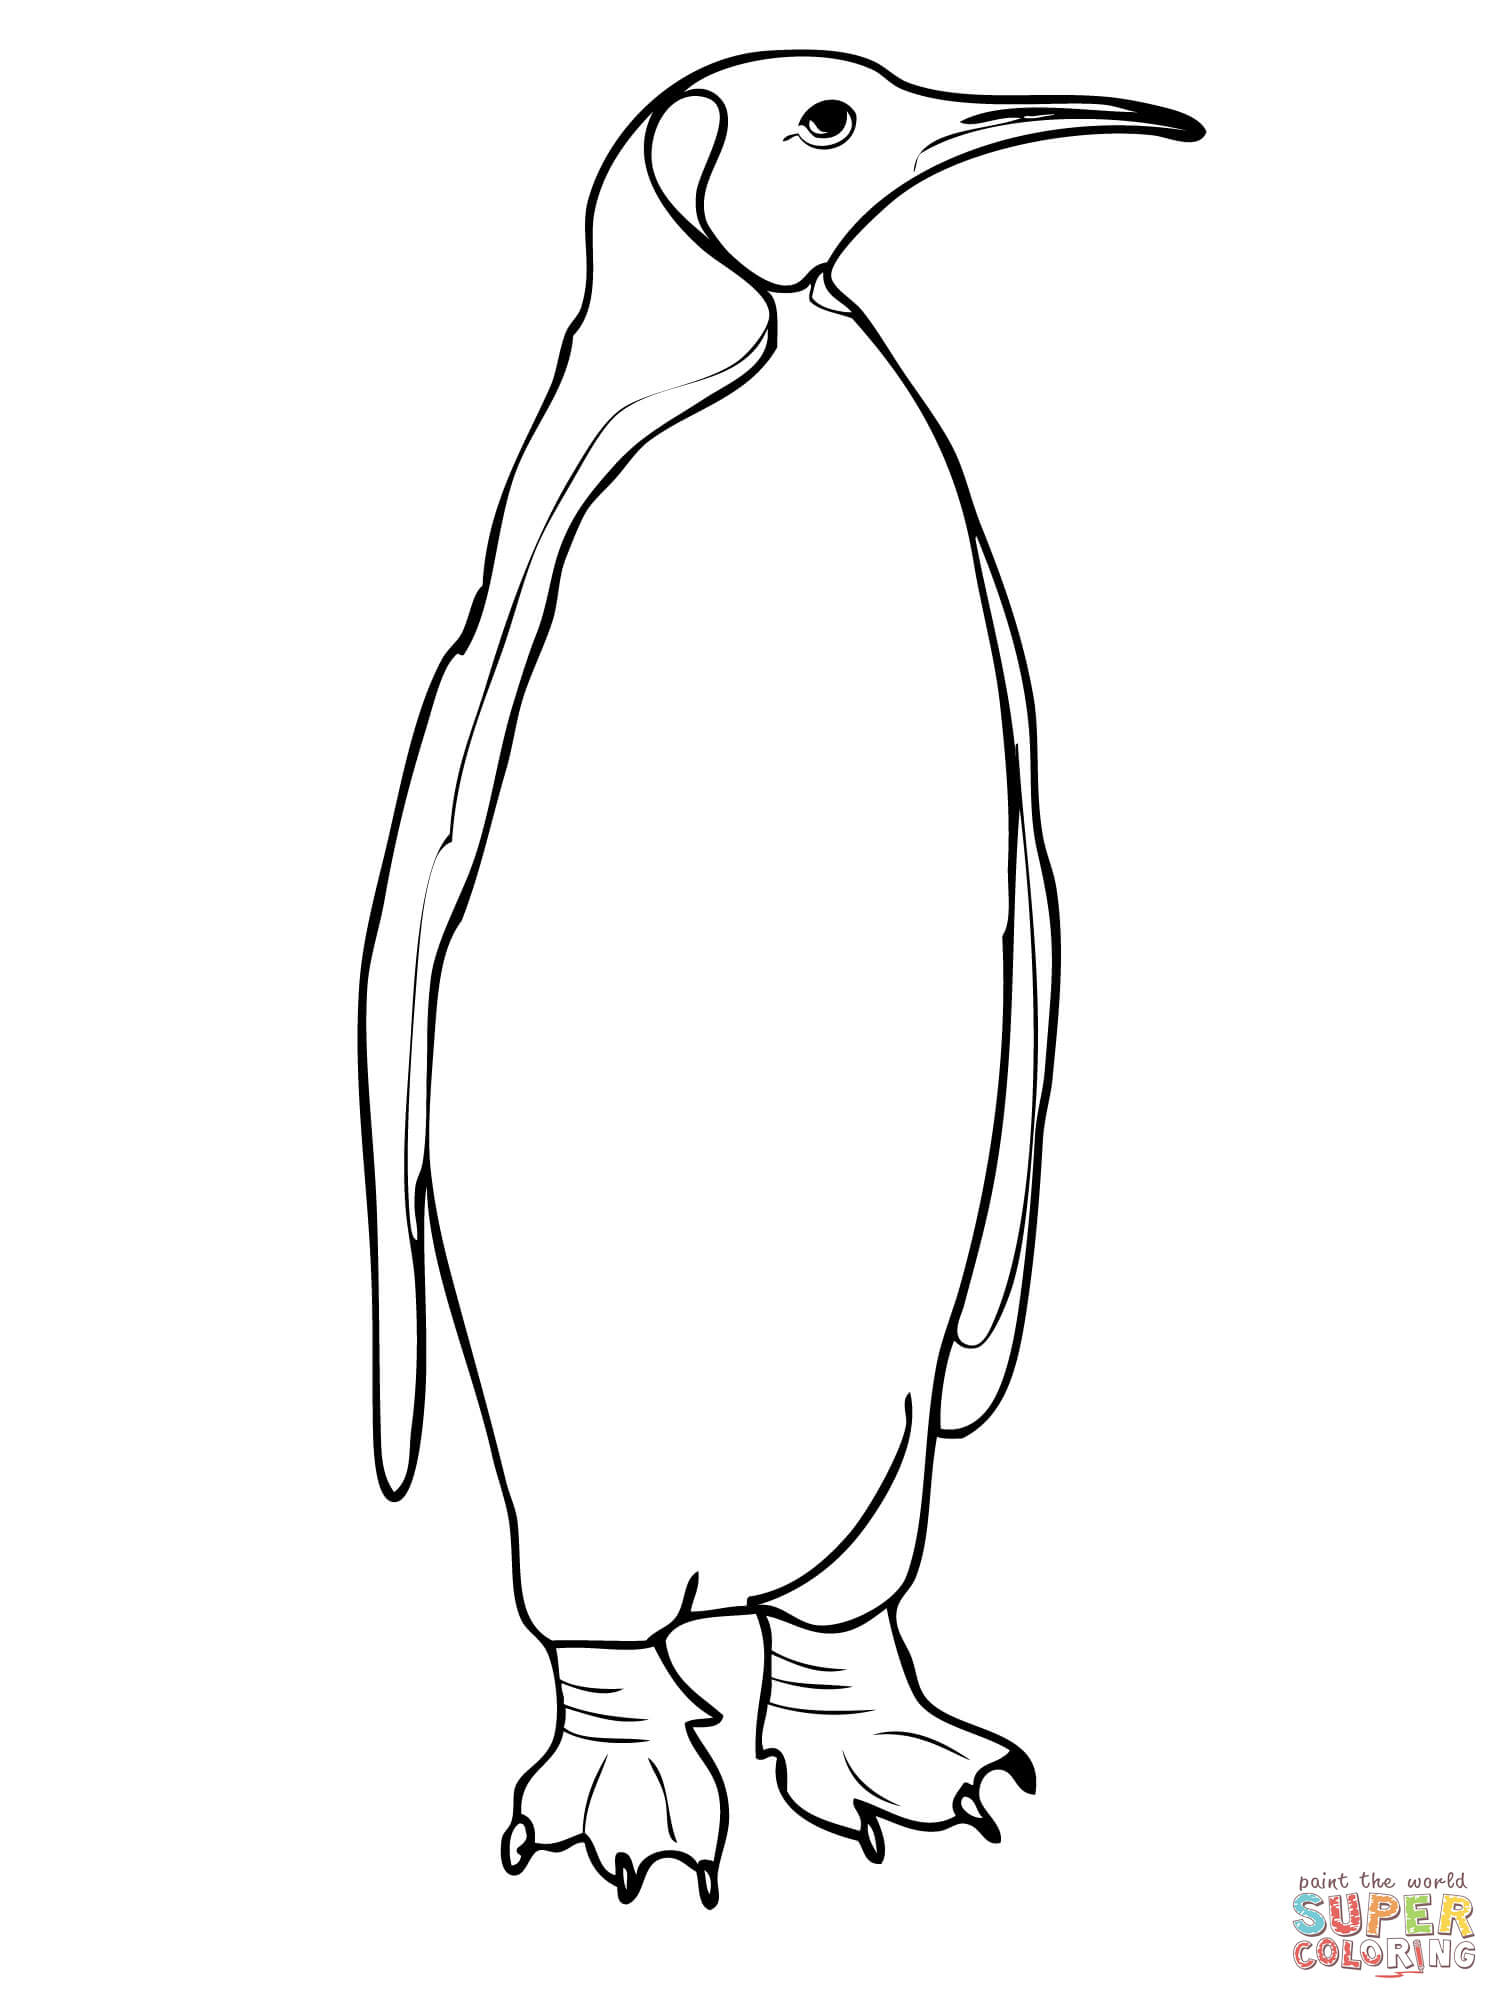 Penguins coloring pages | Free Coloring Pages